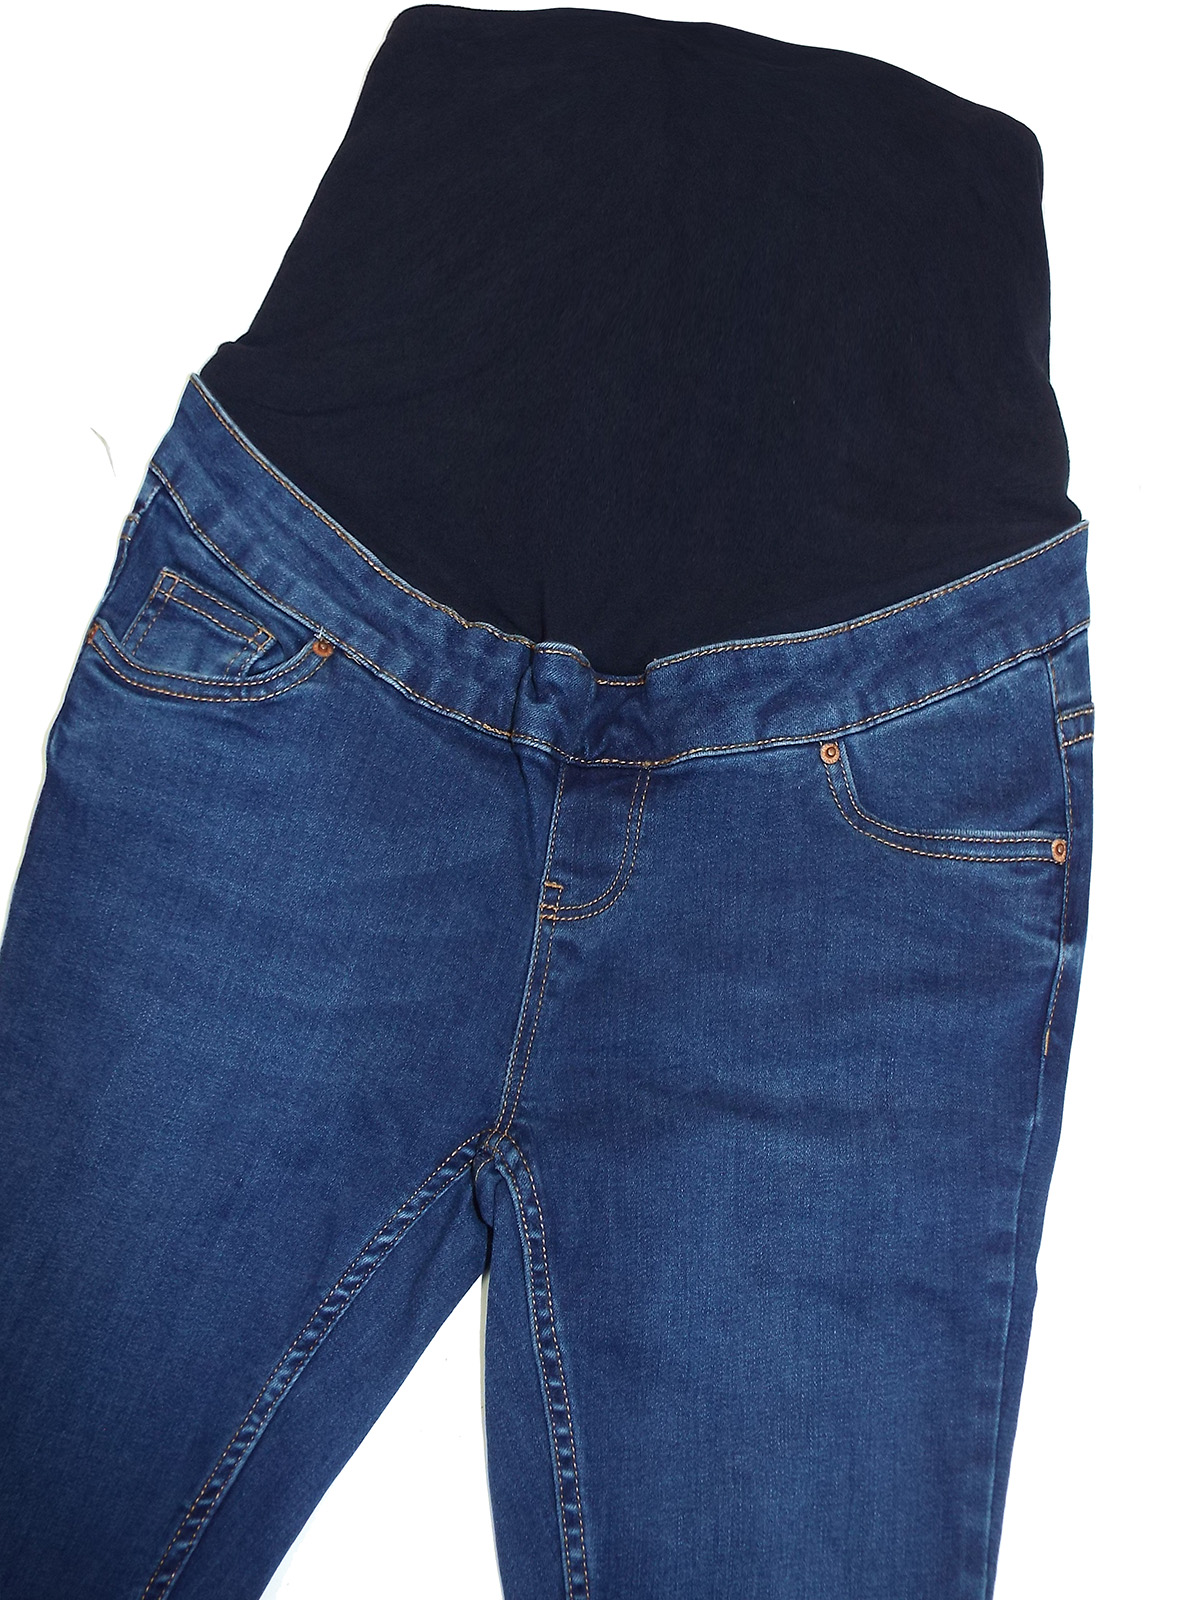 N3W L00K BLUE-RINSE Jenna Maternity Over Bump Jeans - Size 8 to 20 ...